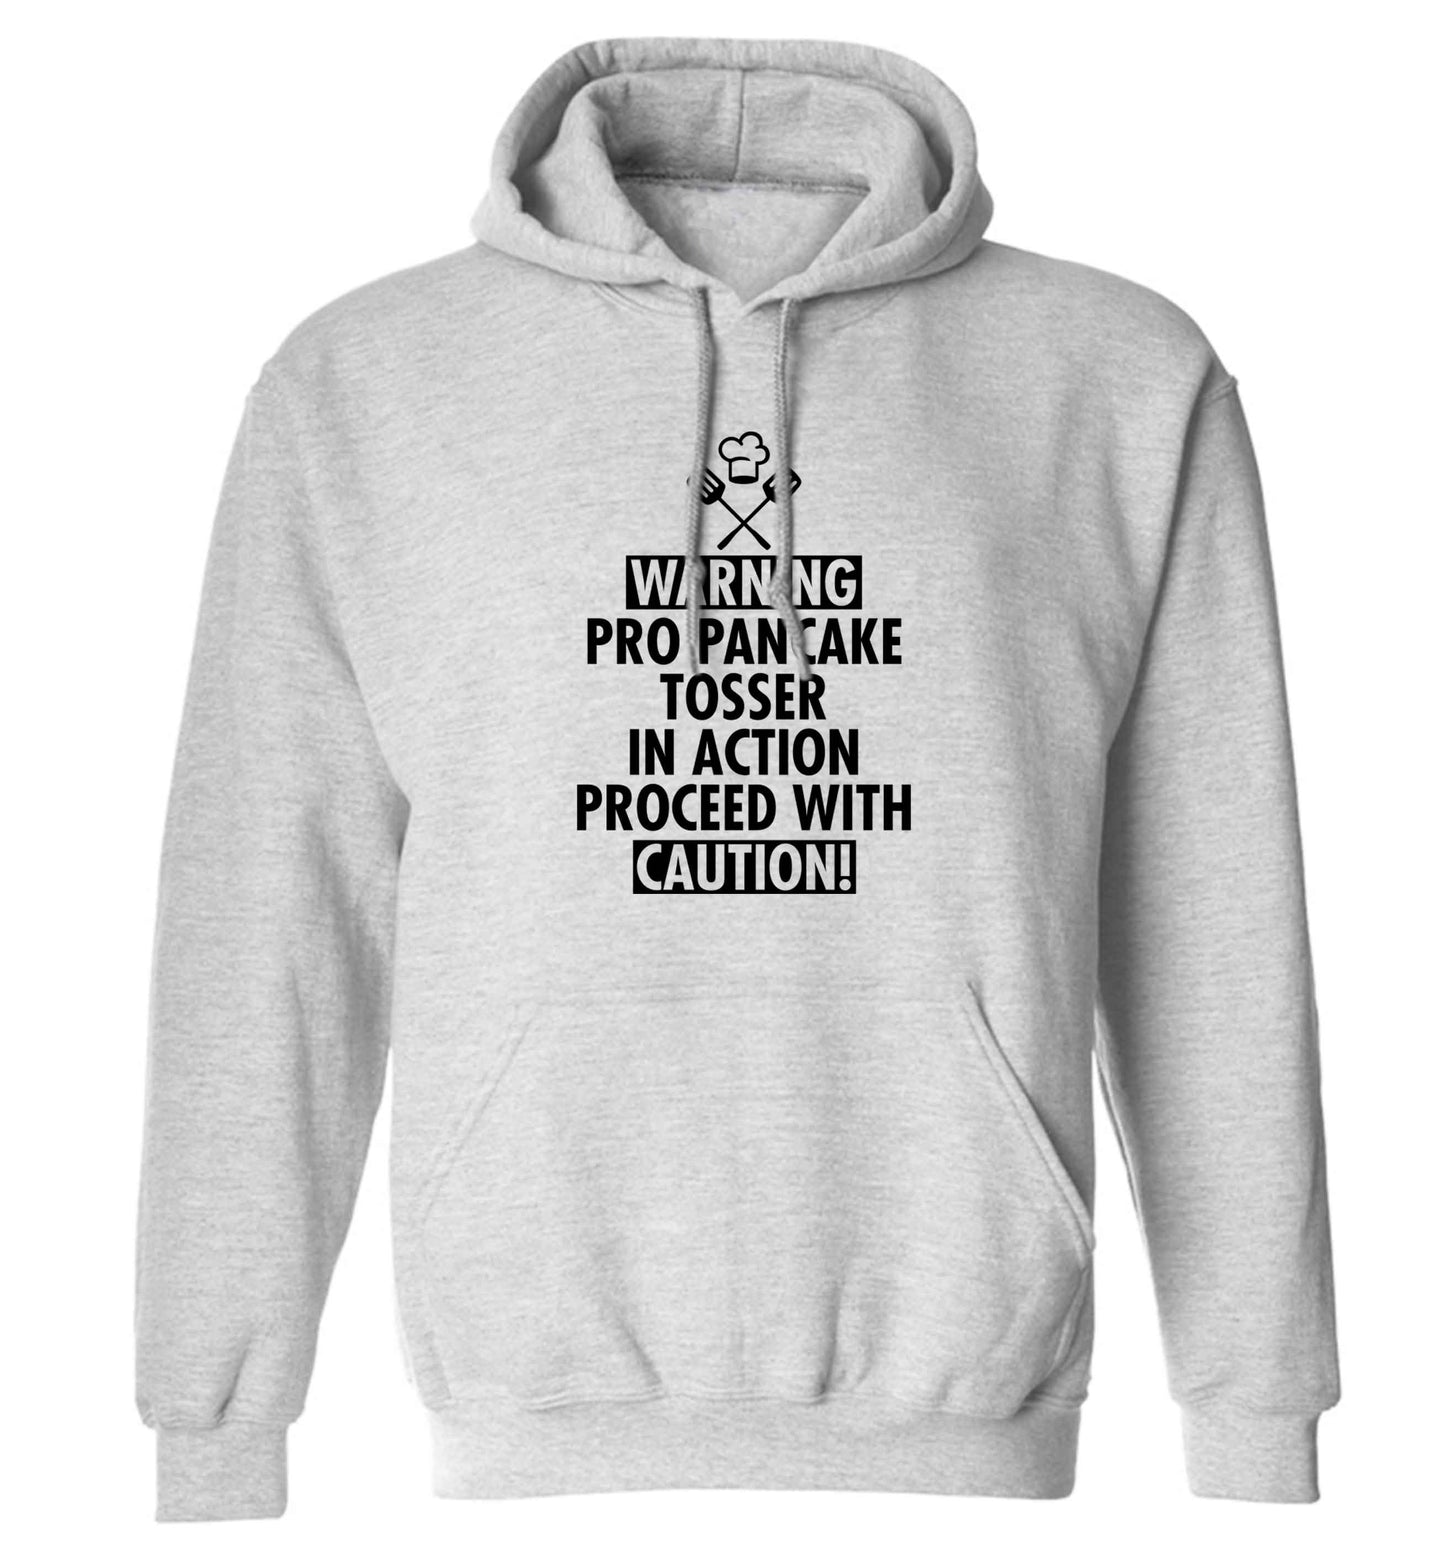 Warning pro pancake tosser in action proceed with caution adults unisex grey hoodie 2XL